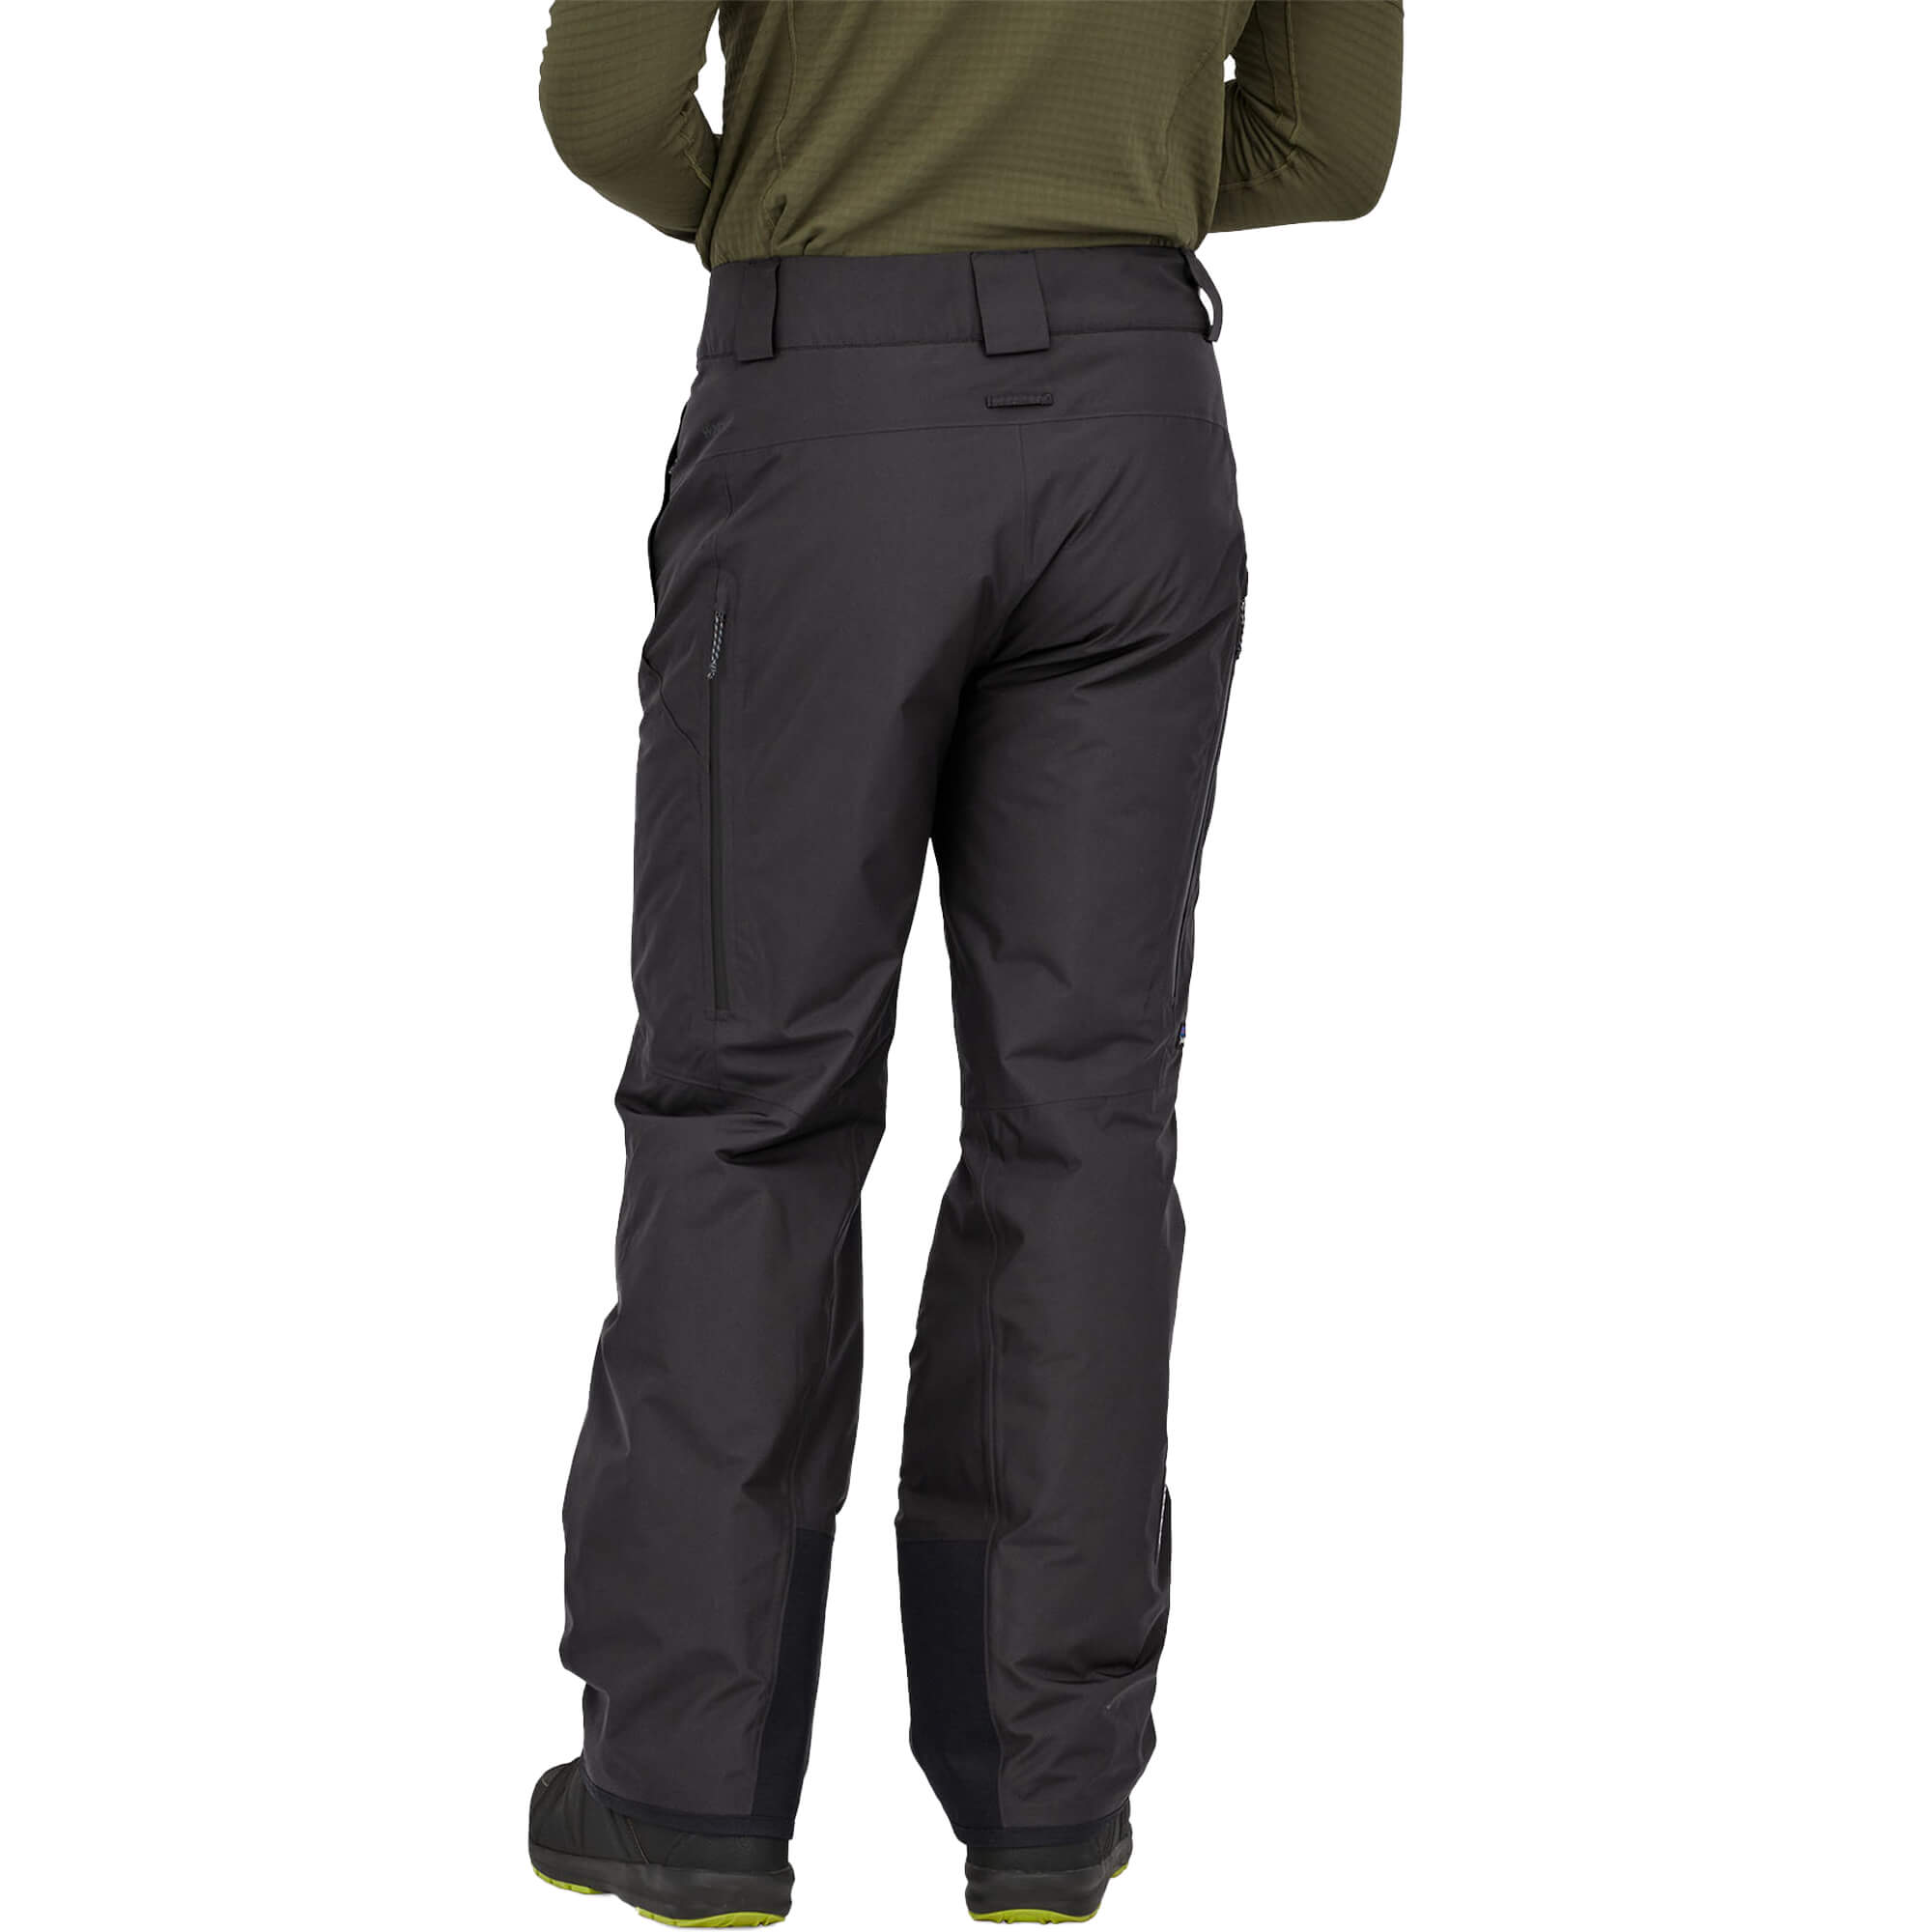 Patagonia Insulated Powder Town Pant Review